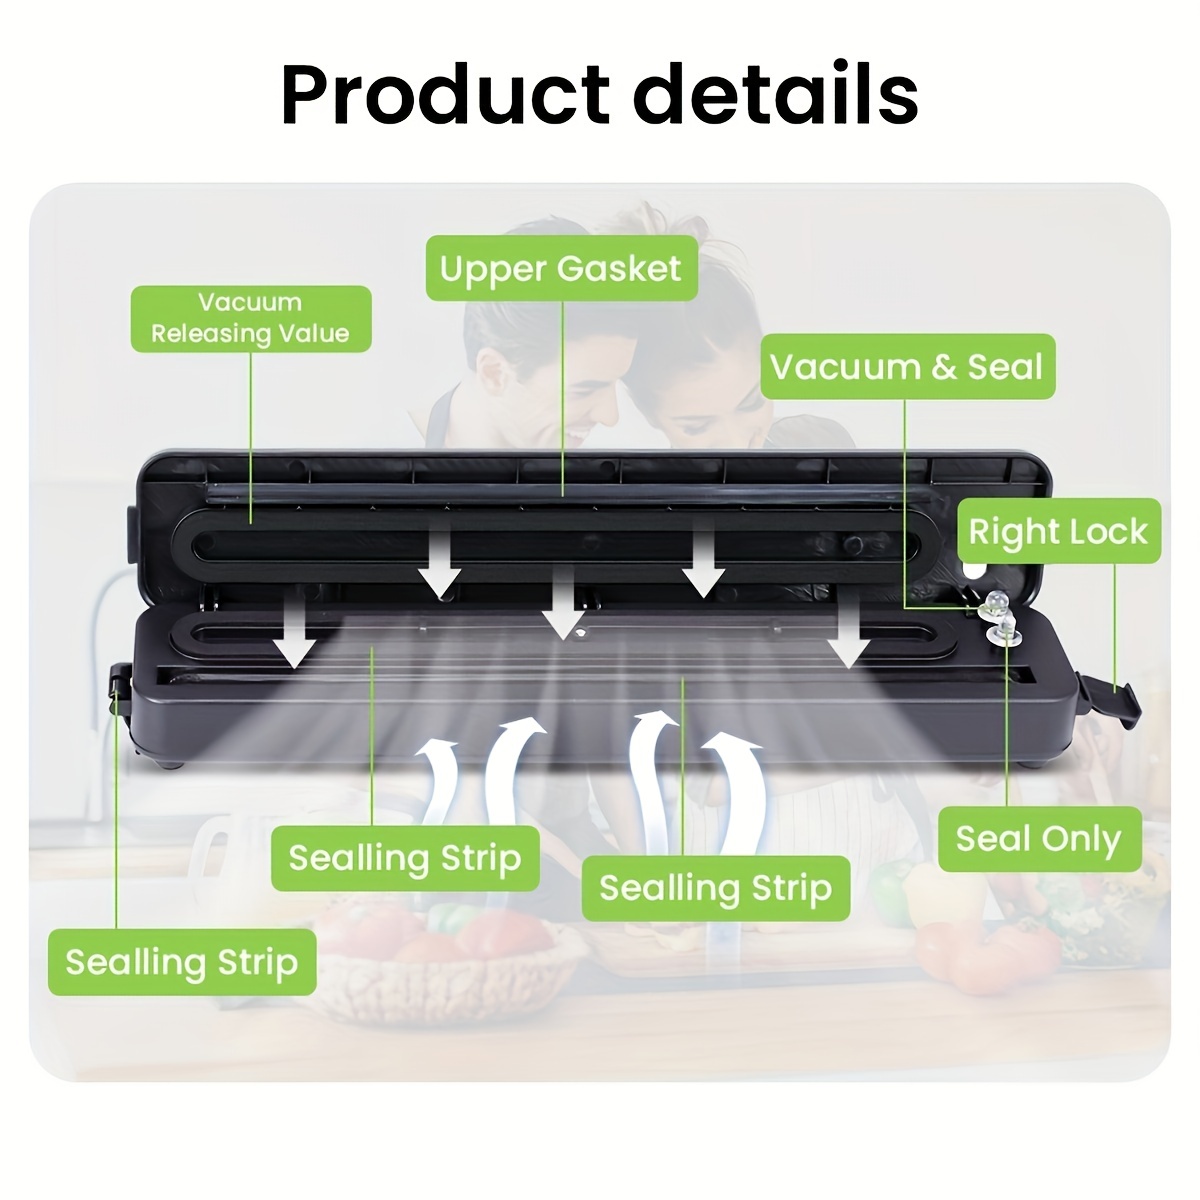 Vacuum Sealer Machine For Food Preservation - Automatic Air Sealing System  For Dry And Wet Food Storage With Compact Design, 10pcs Starter Kit Seal  Bags (black)